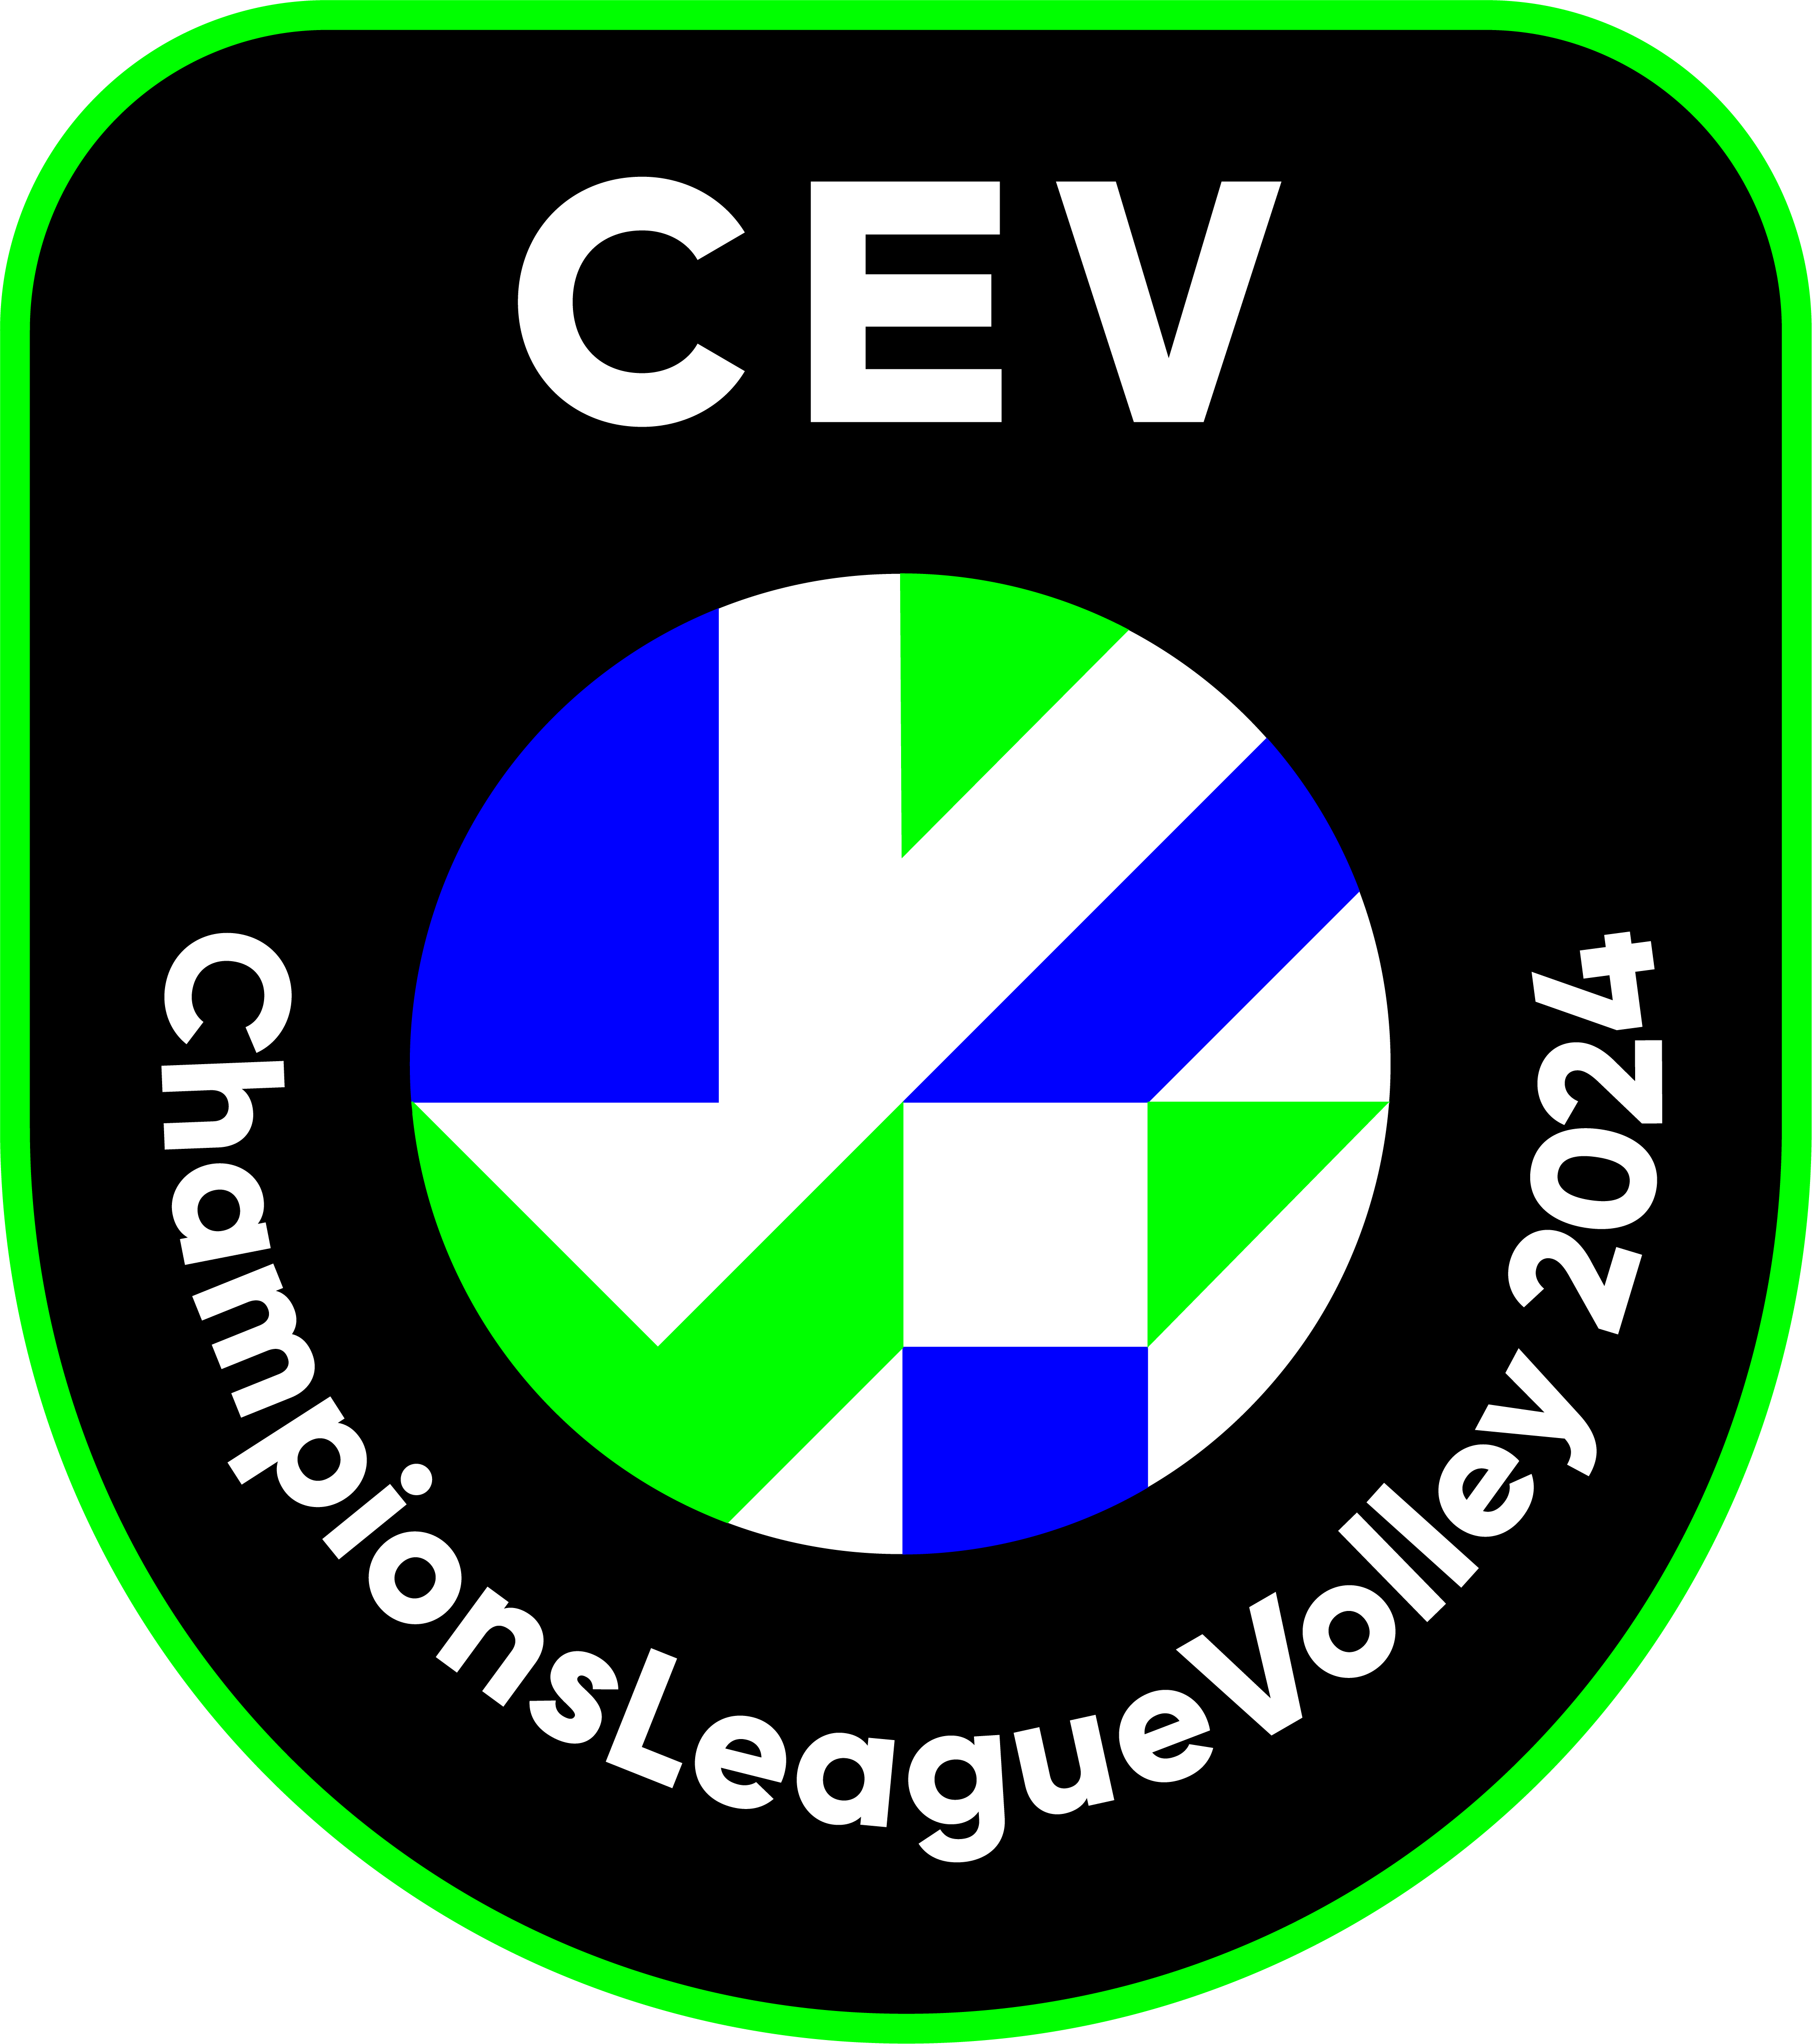 clv24-crest-rgb-150.png?v=1d9bfd6dc7fa64